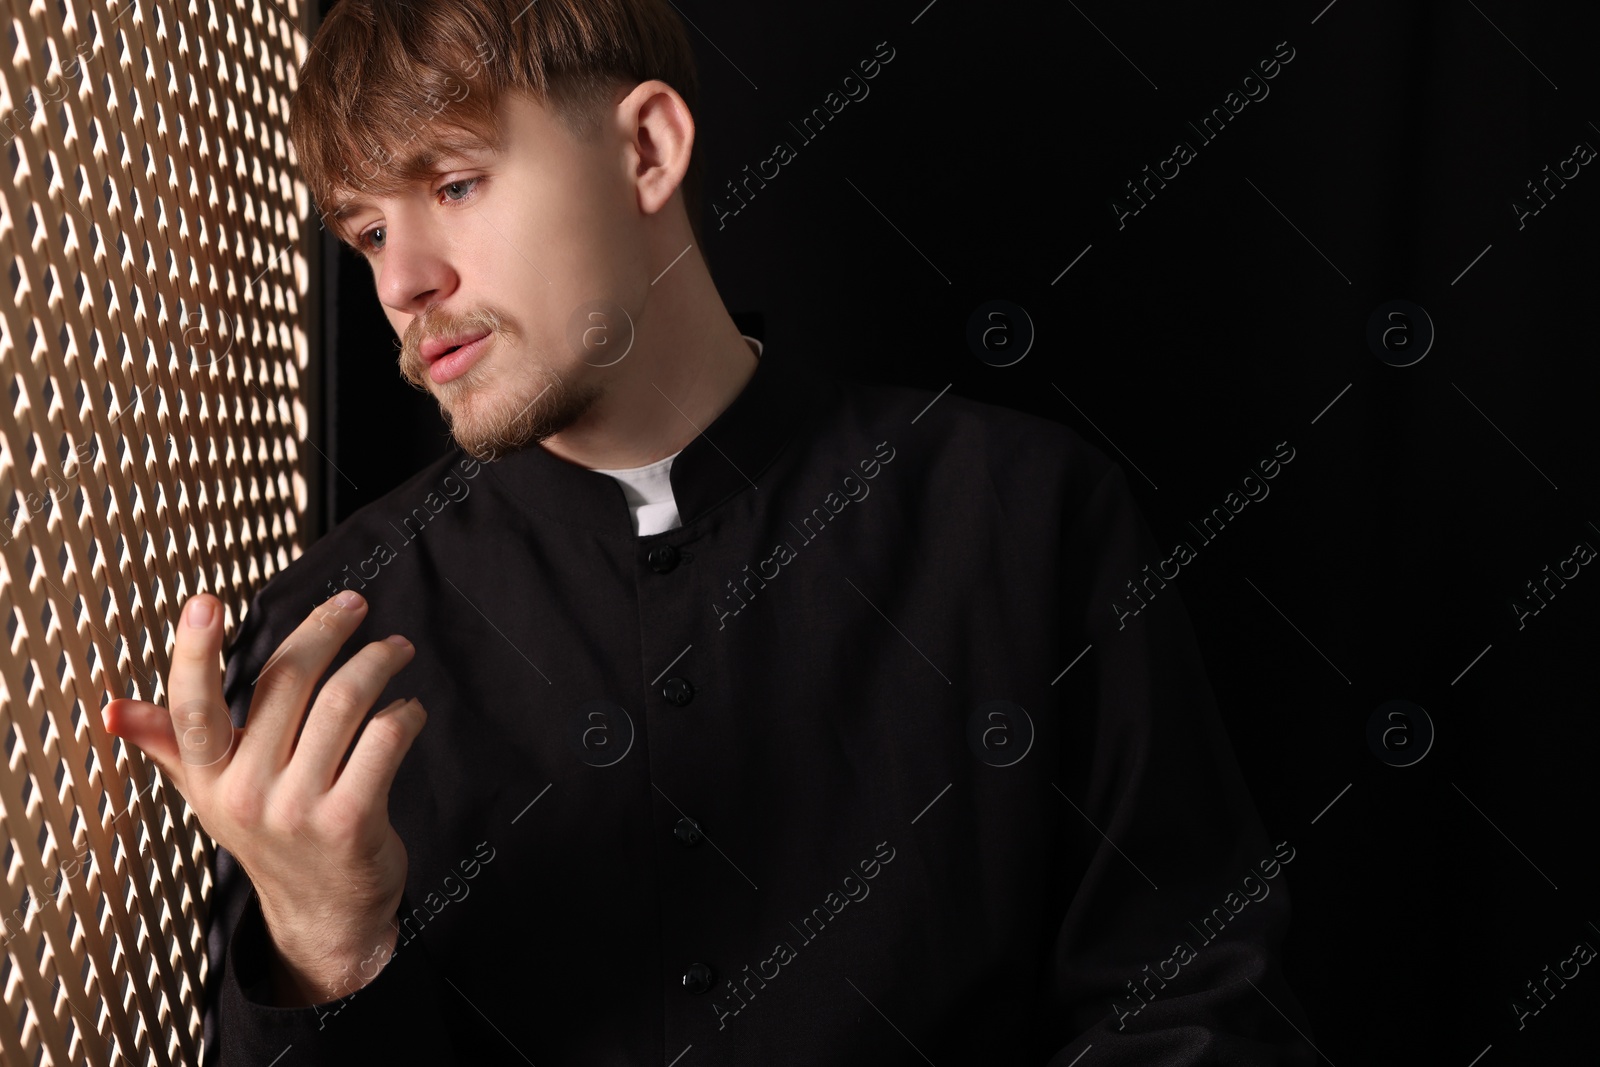 Photo of Catholic priest talking to parishioner in confessional booth